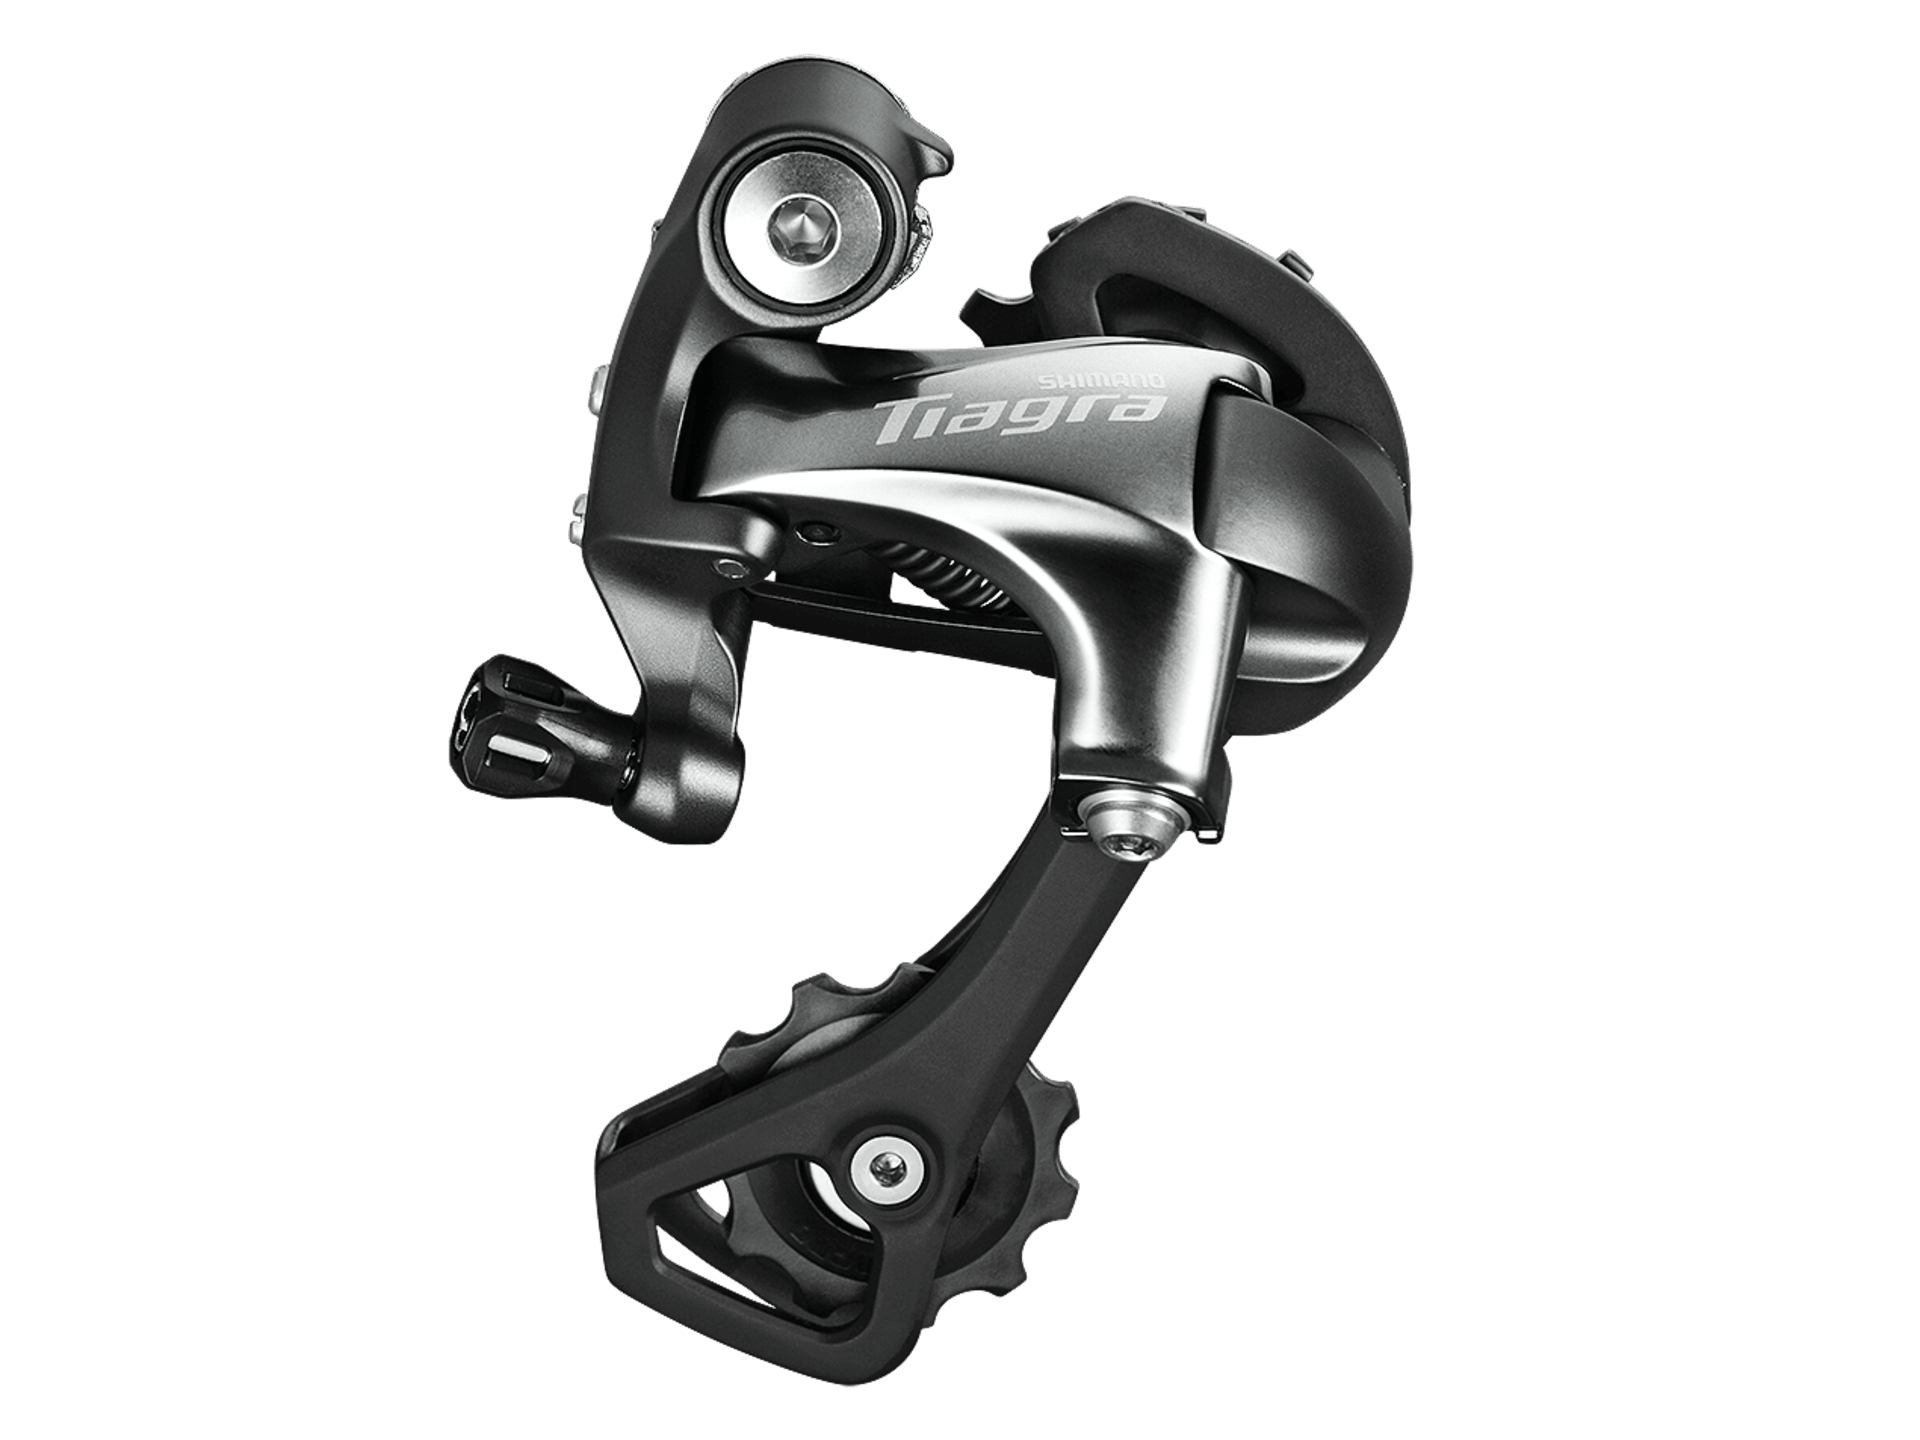 Shimano Tiagra 4700 Rear Derailleur Middle Cage - THE BICYCLE STATION